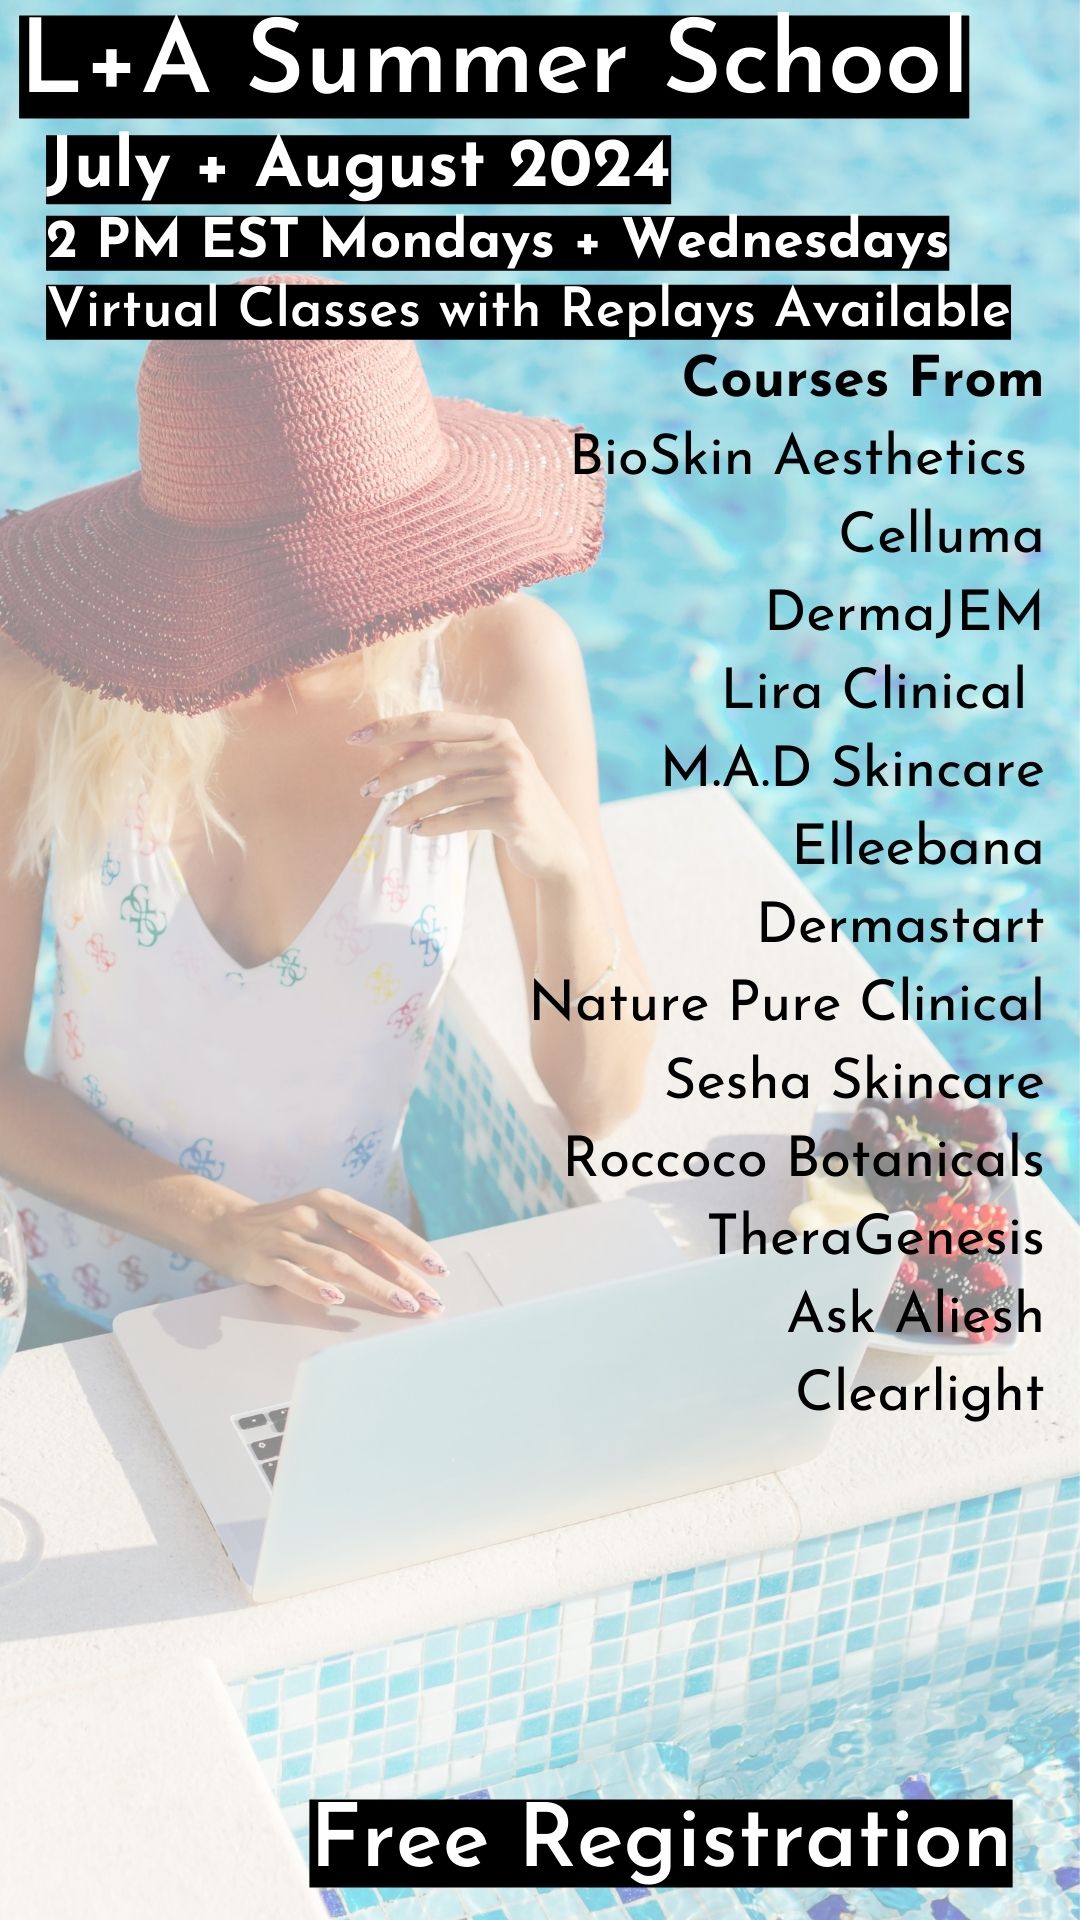 Medical + spa skincare professionals can spend July + August expanding their science skill set